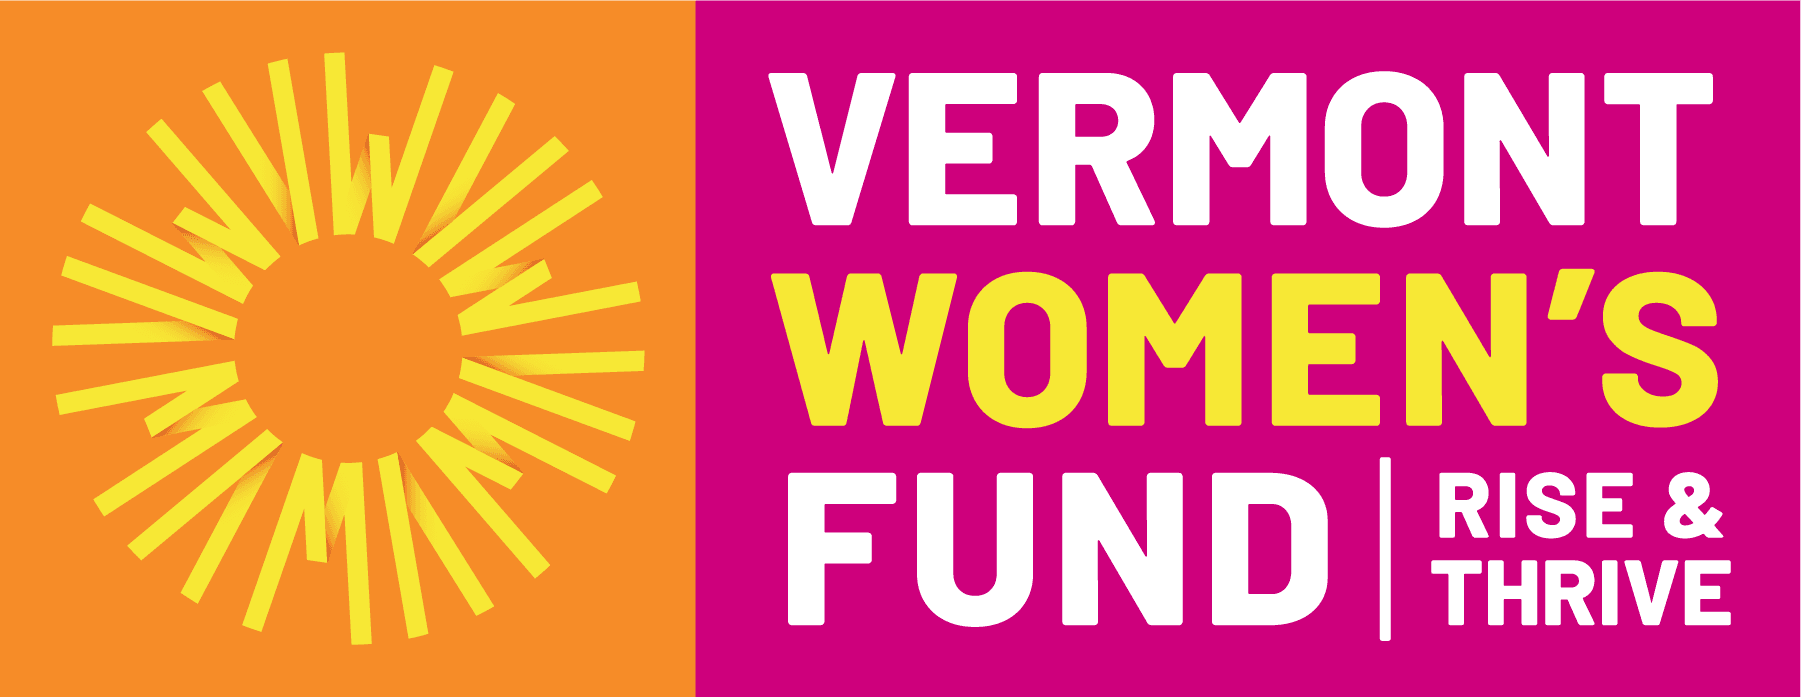 UWLC receives a $10,000 grant from the Vermont Women’s Fund to support the New Foundations program